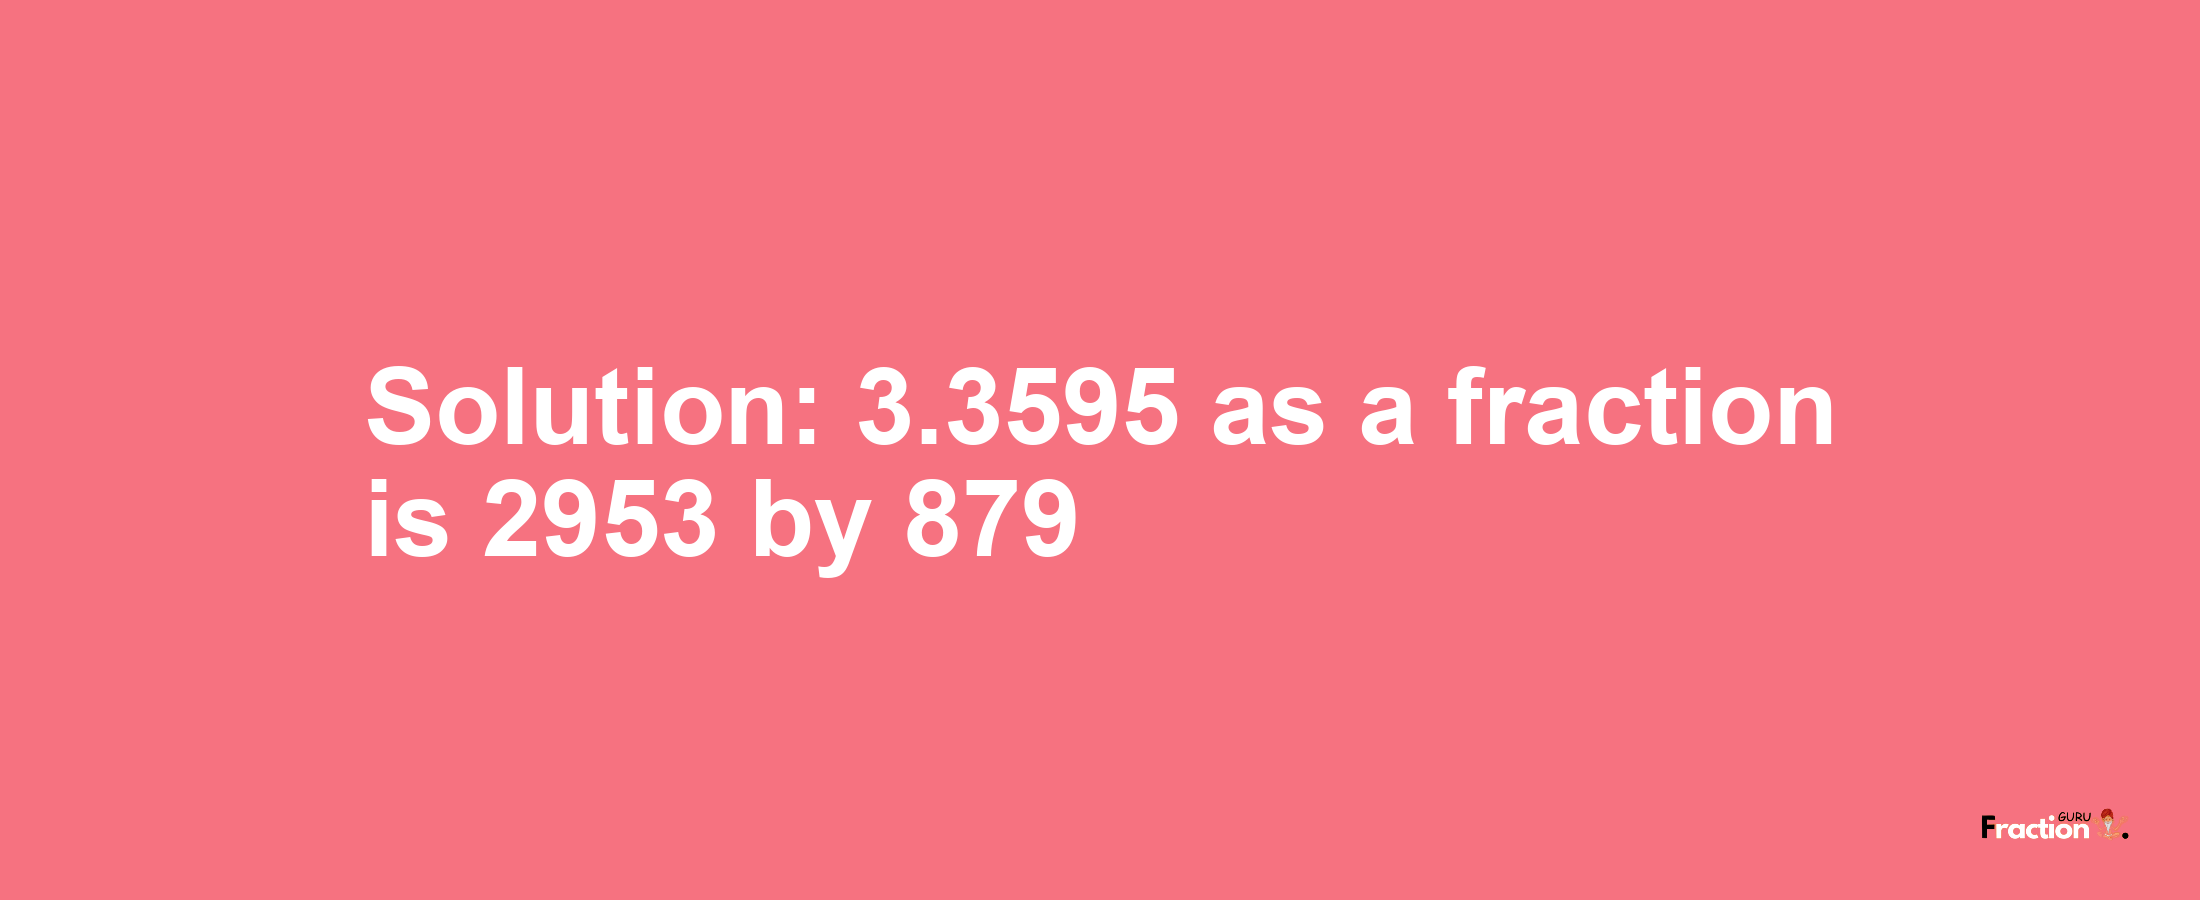 Solution:3.3595 as a fraction is 2953/879